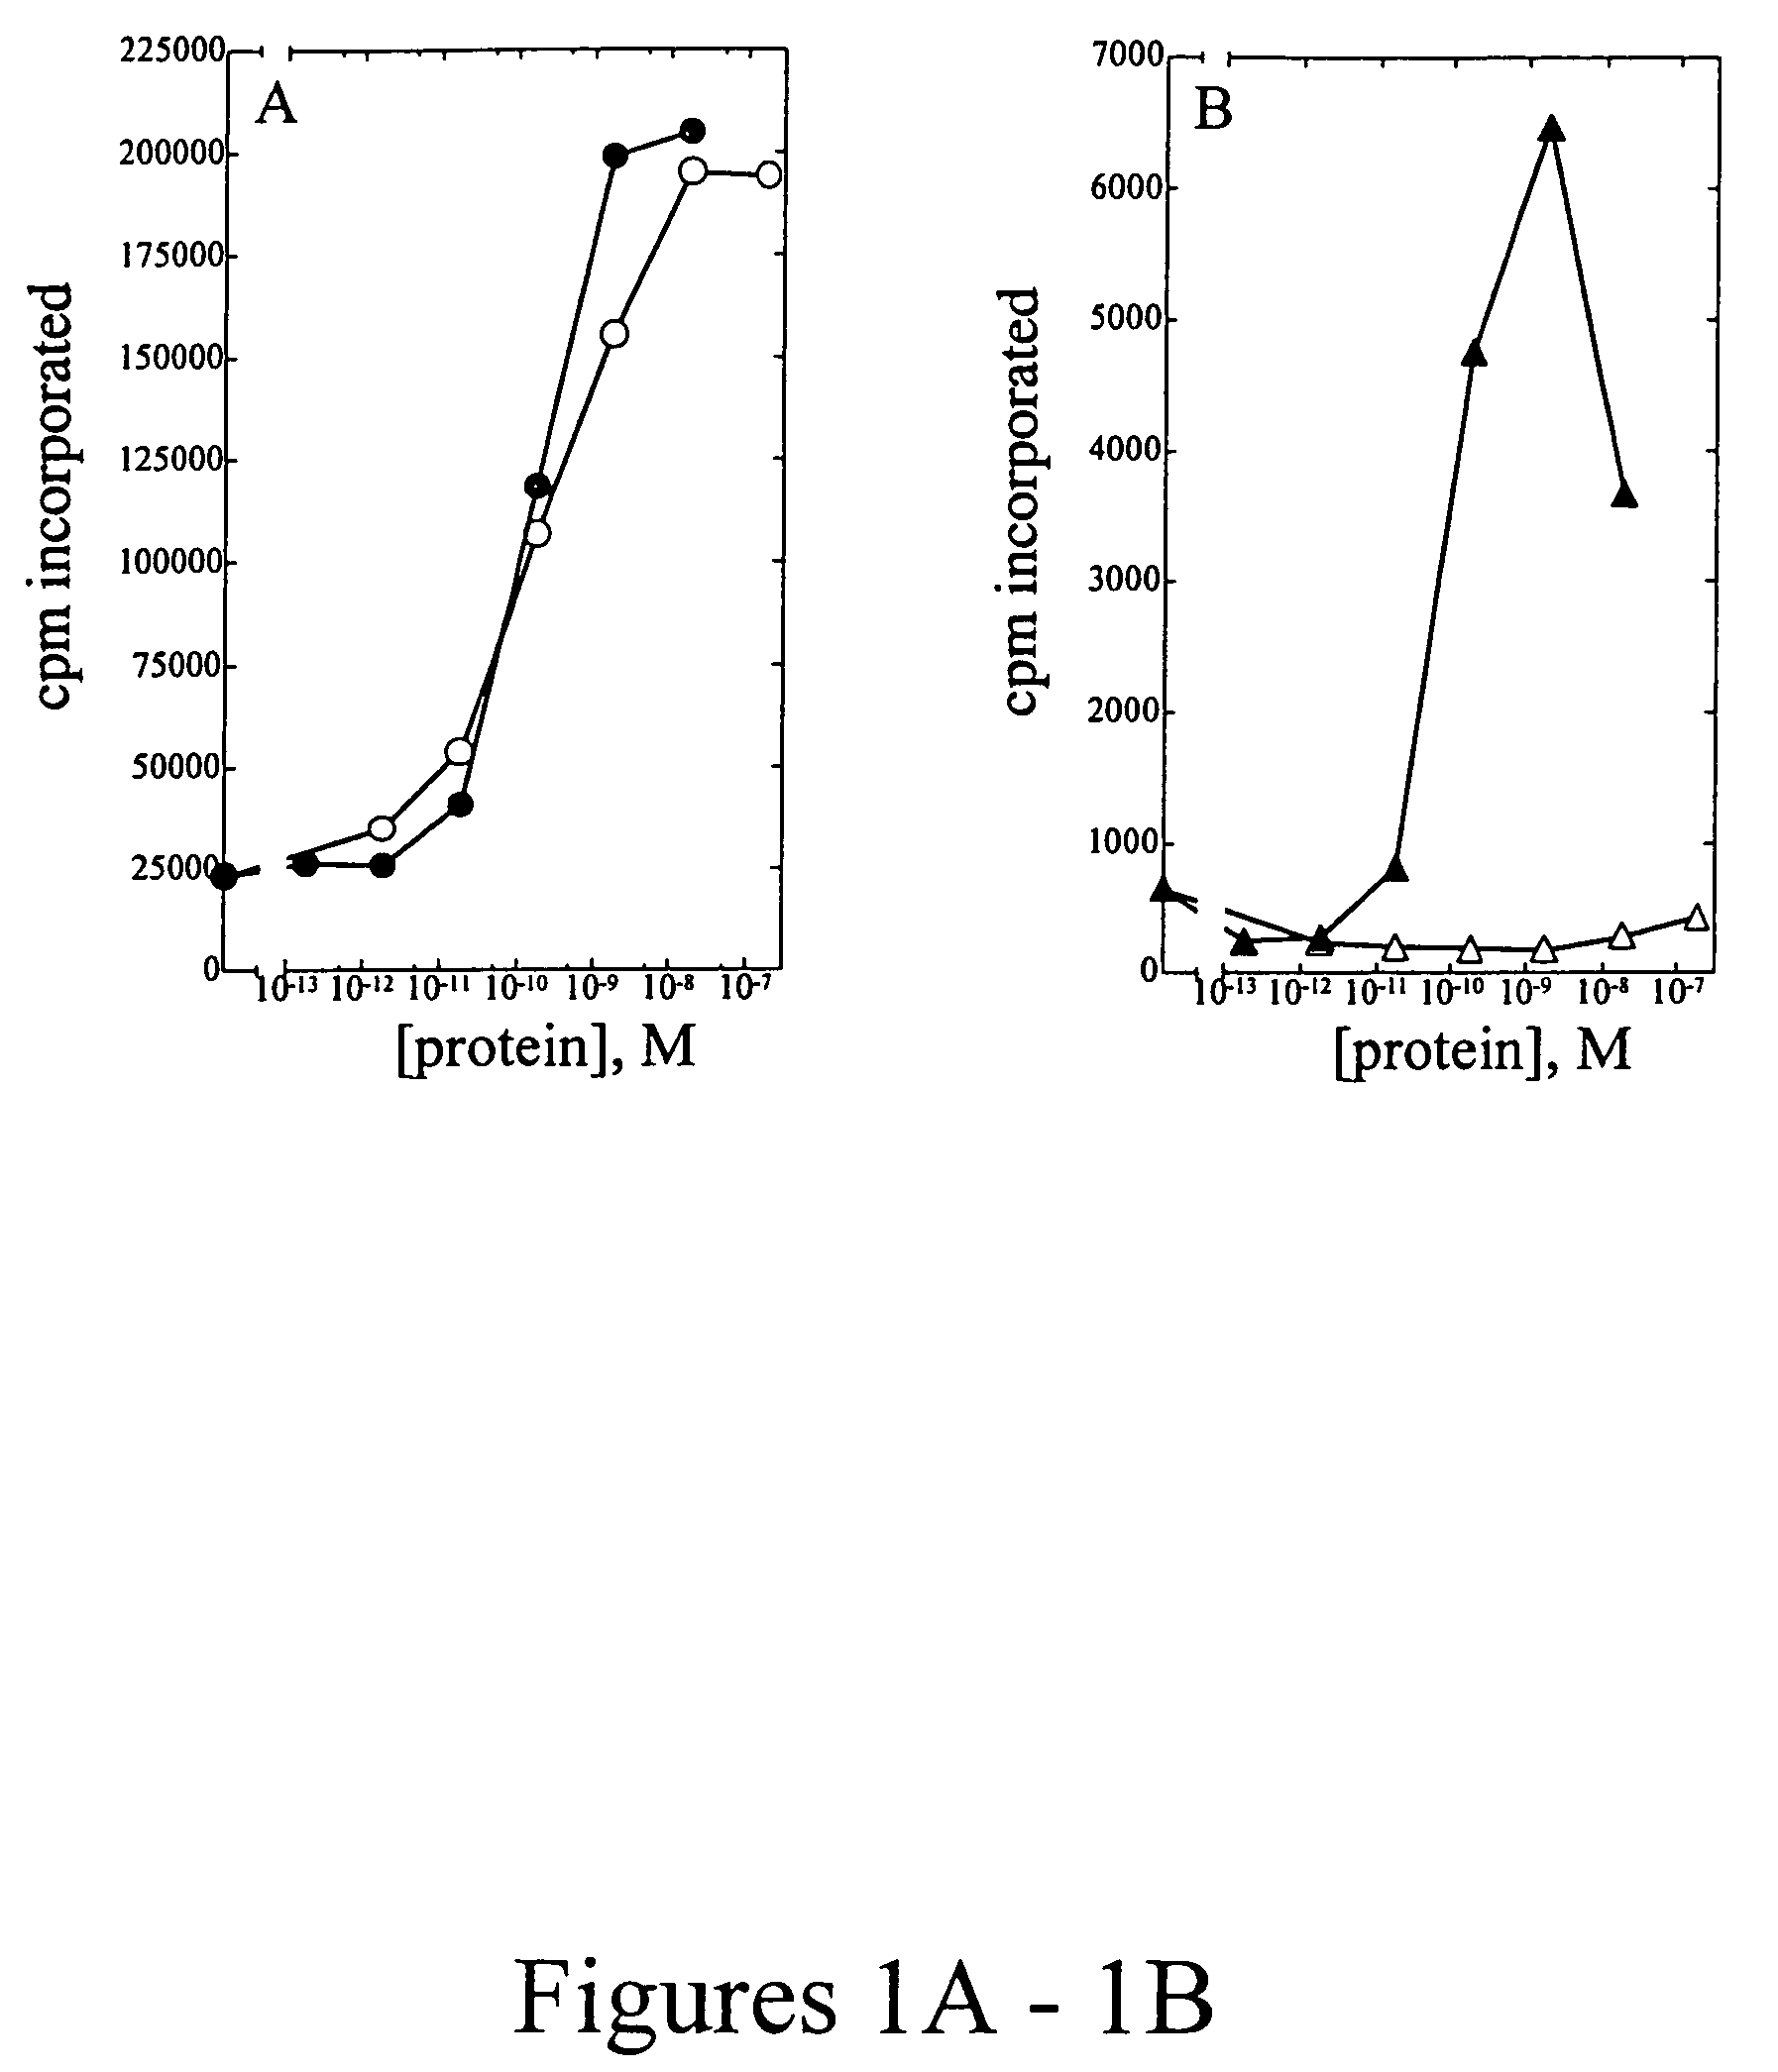 IL-2 selective agonists and antagonists